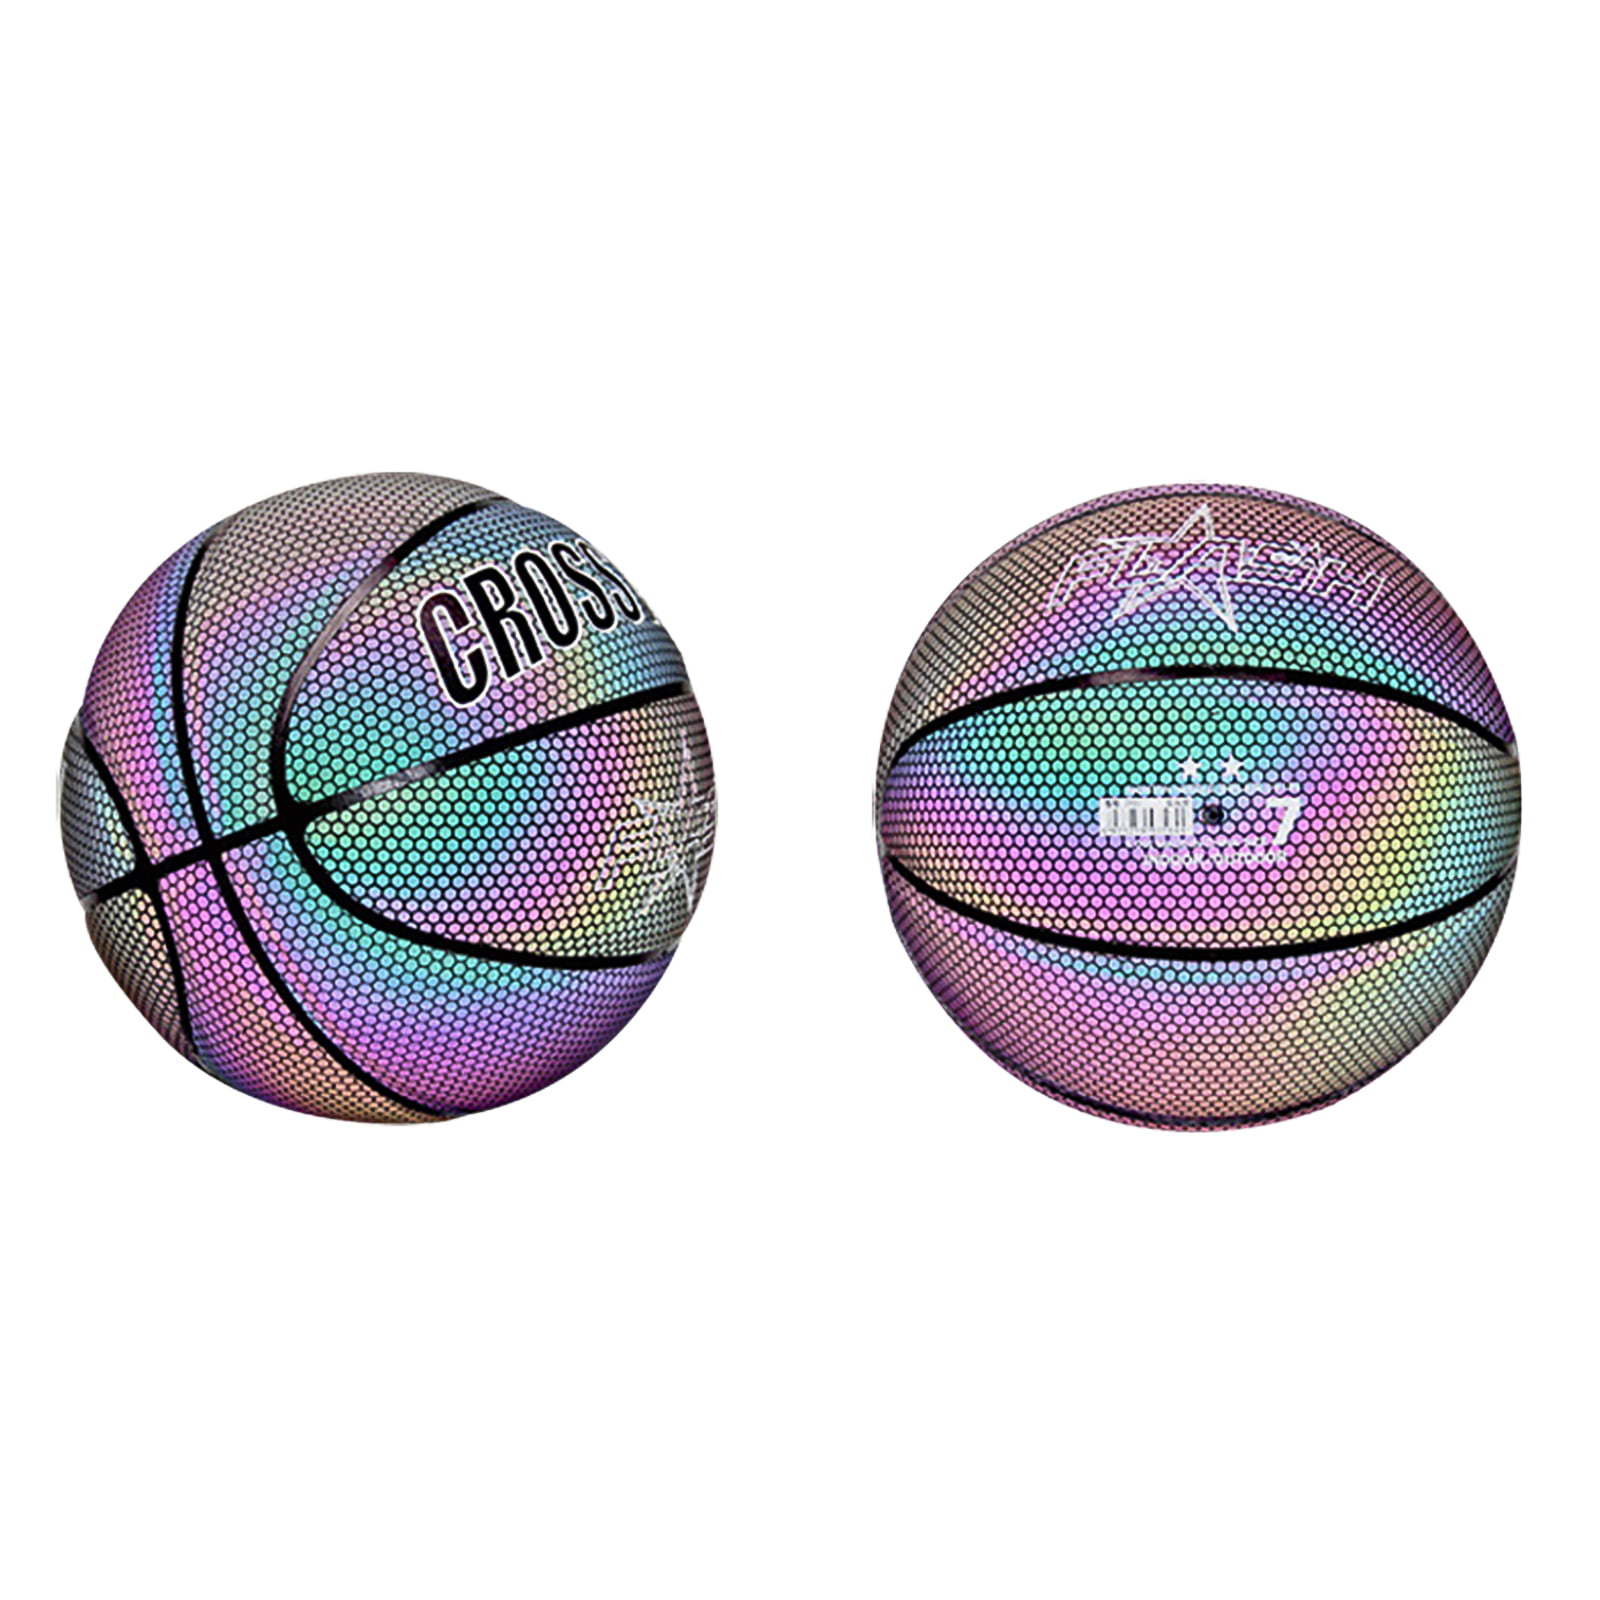 Holographic Glowing Reflective Basketball Luminous NO.7 for Night Sports Gifts 